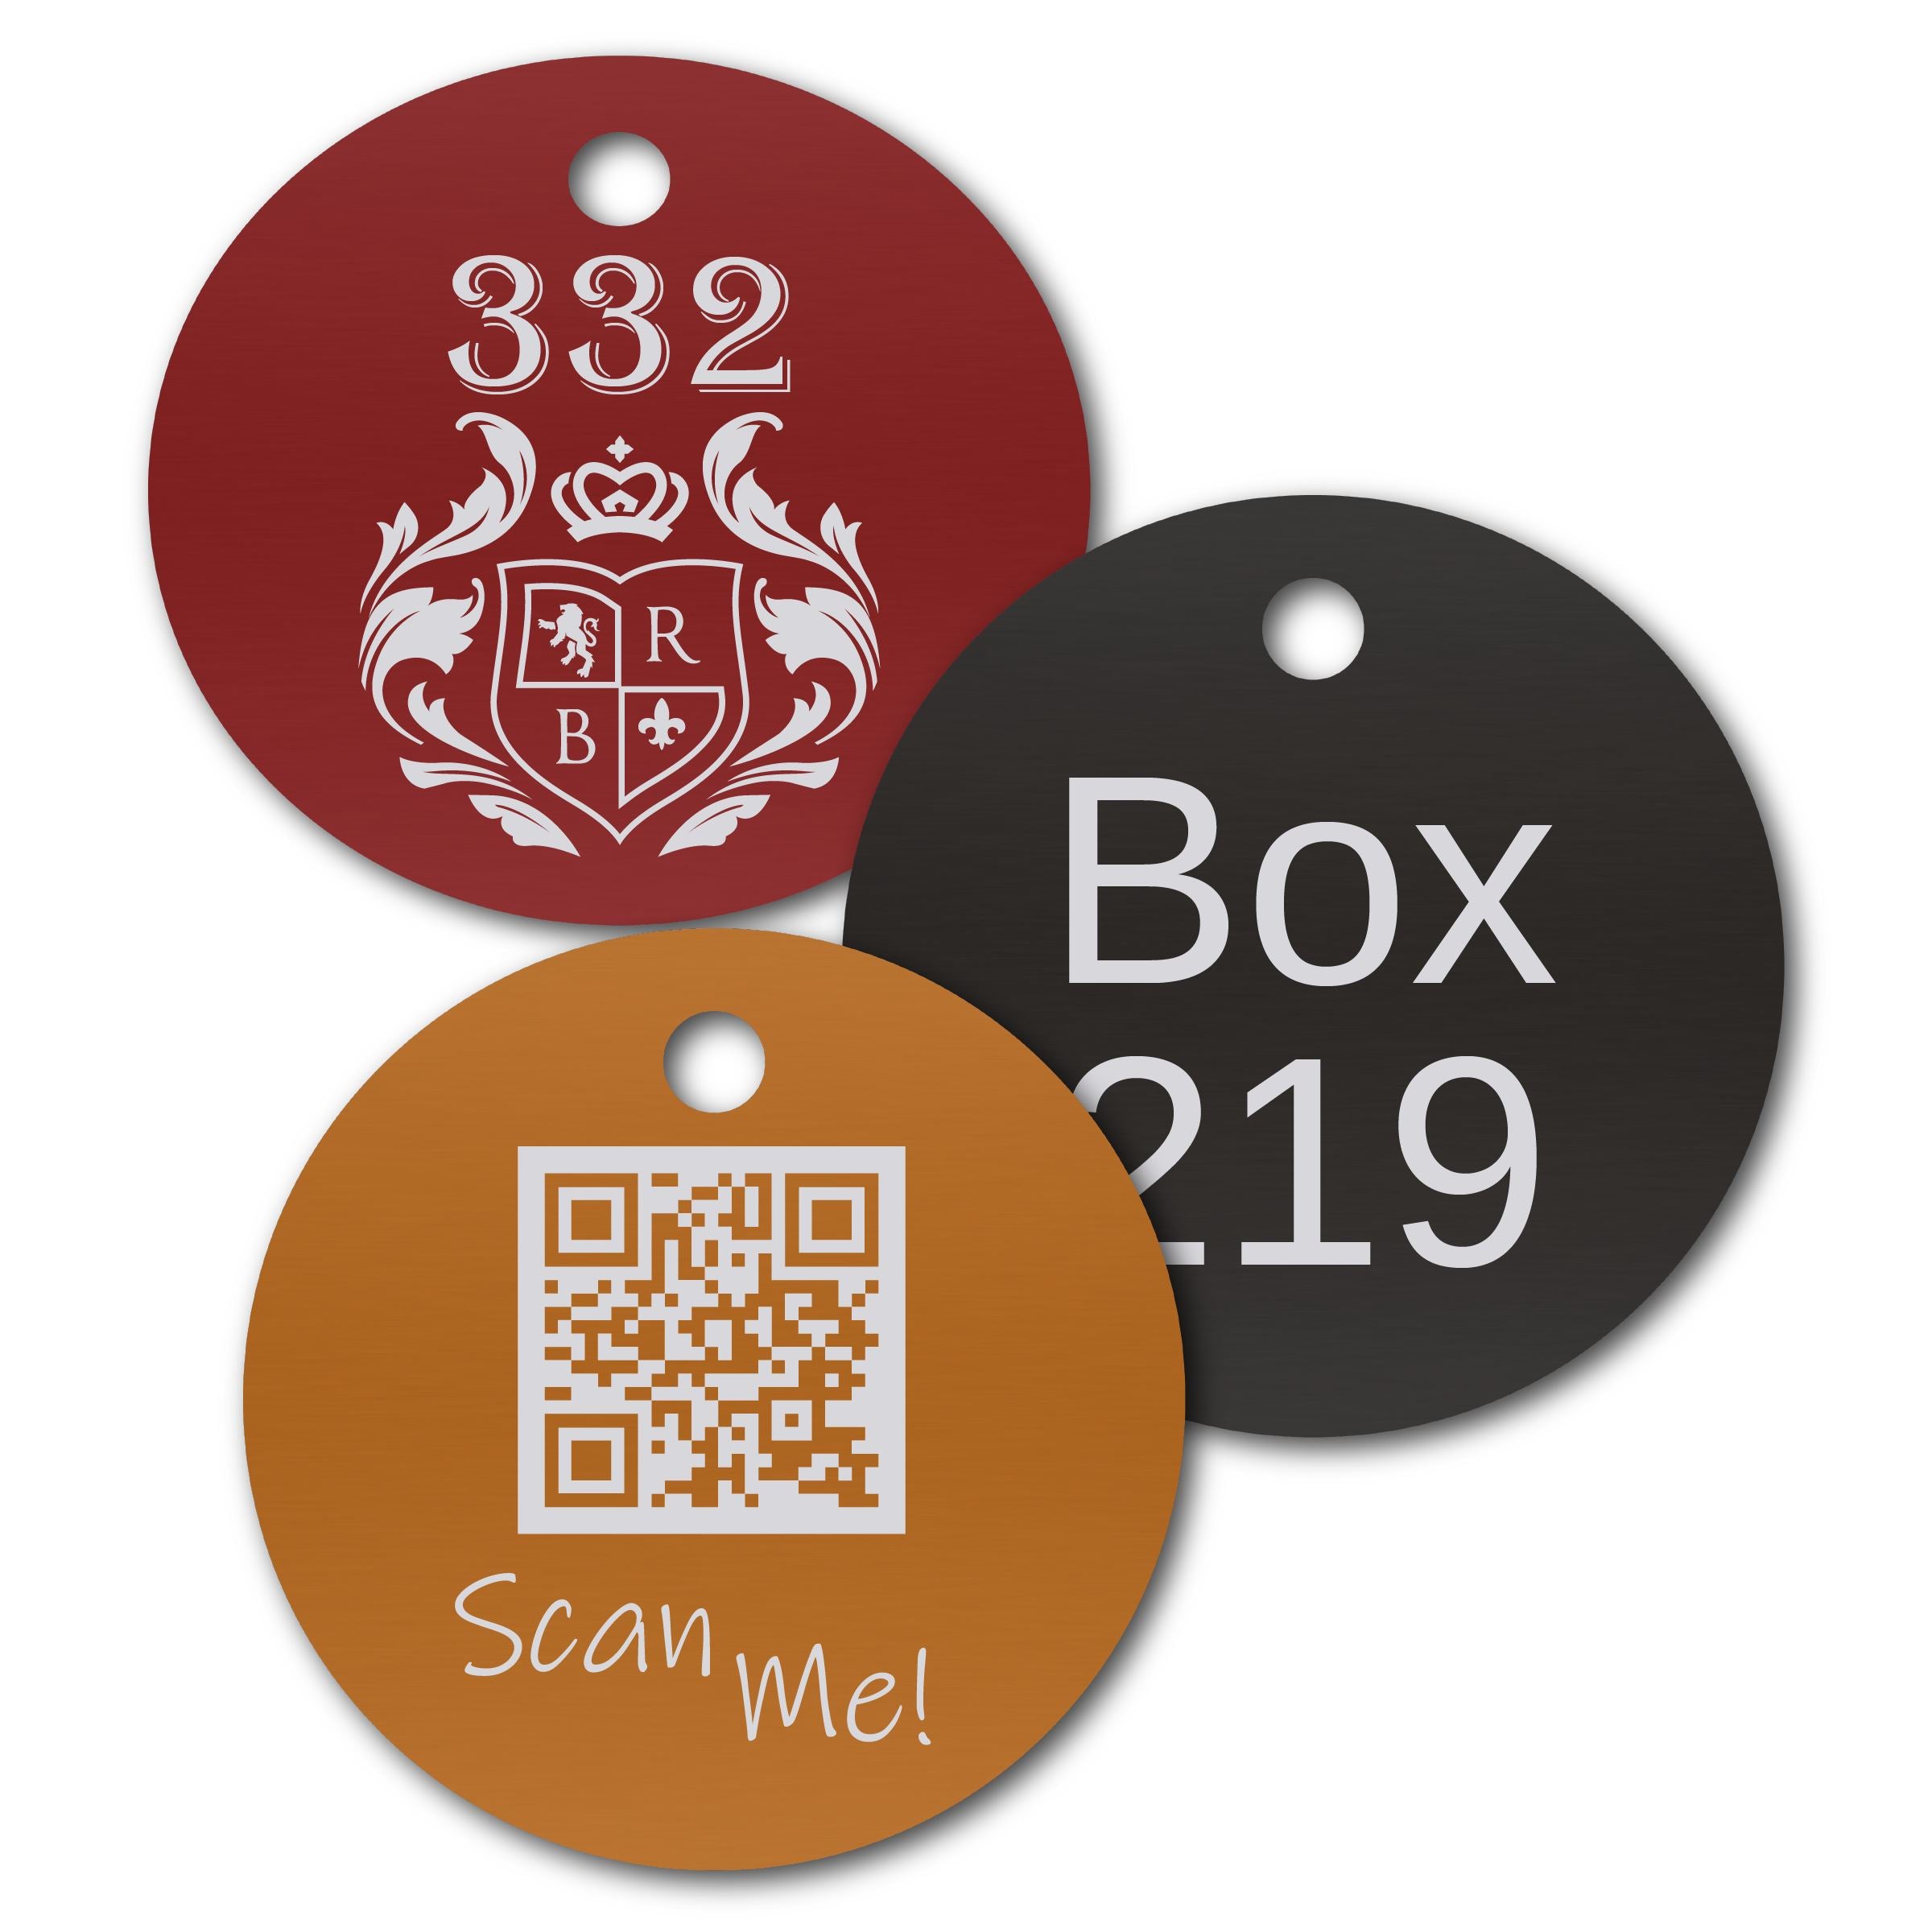 Anodized Aluminum Round Tags, 1-1/2" with 1/8" Hole, Laser Engraved Metal Tags Craftworks NW 